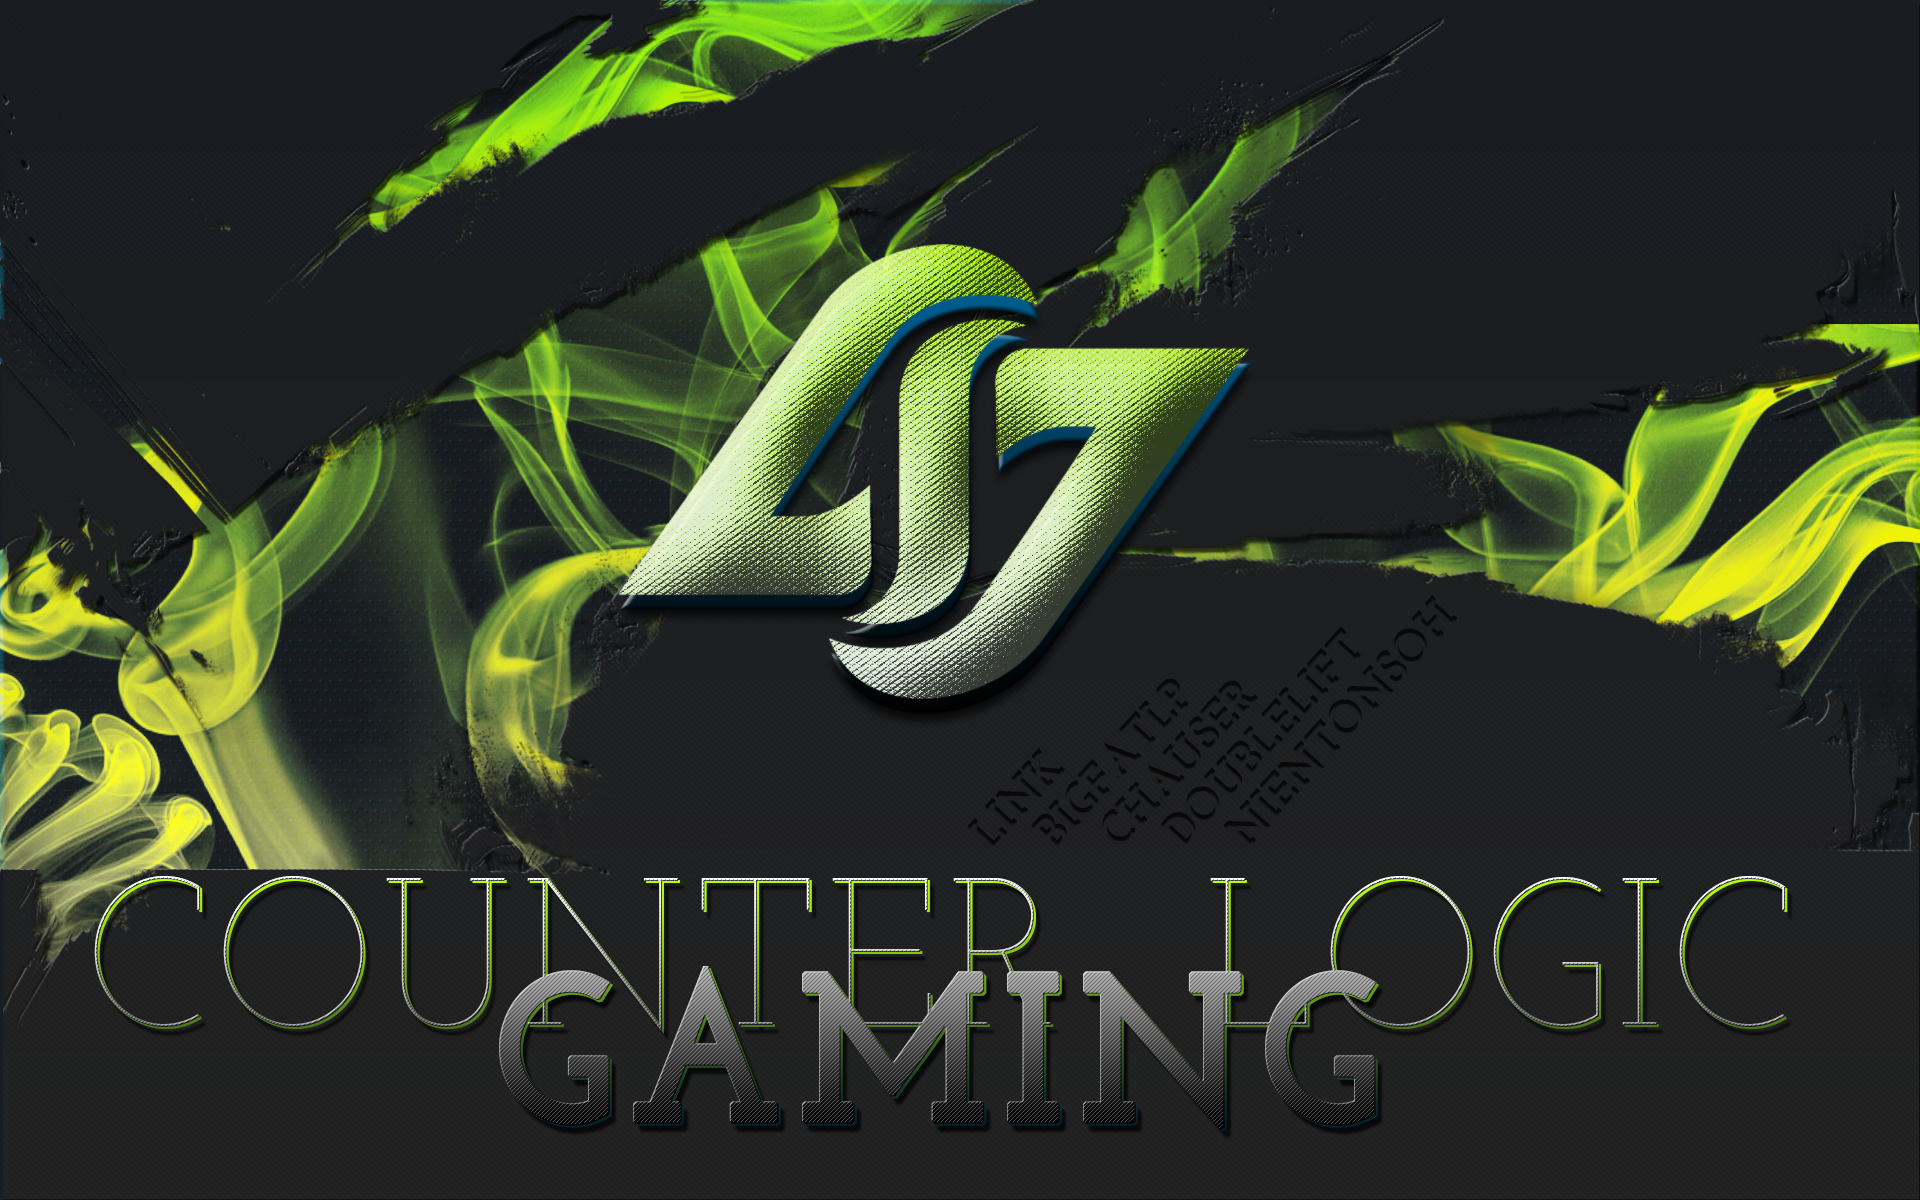 CLG COUNTER LOGIC GAMING WALLPAPER 1920X1200 by FireLysm on